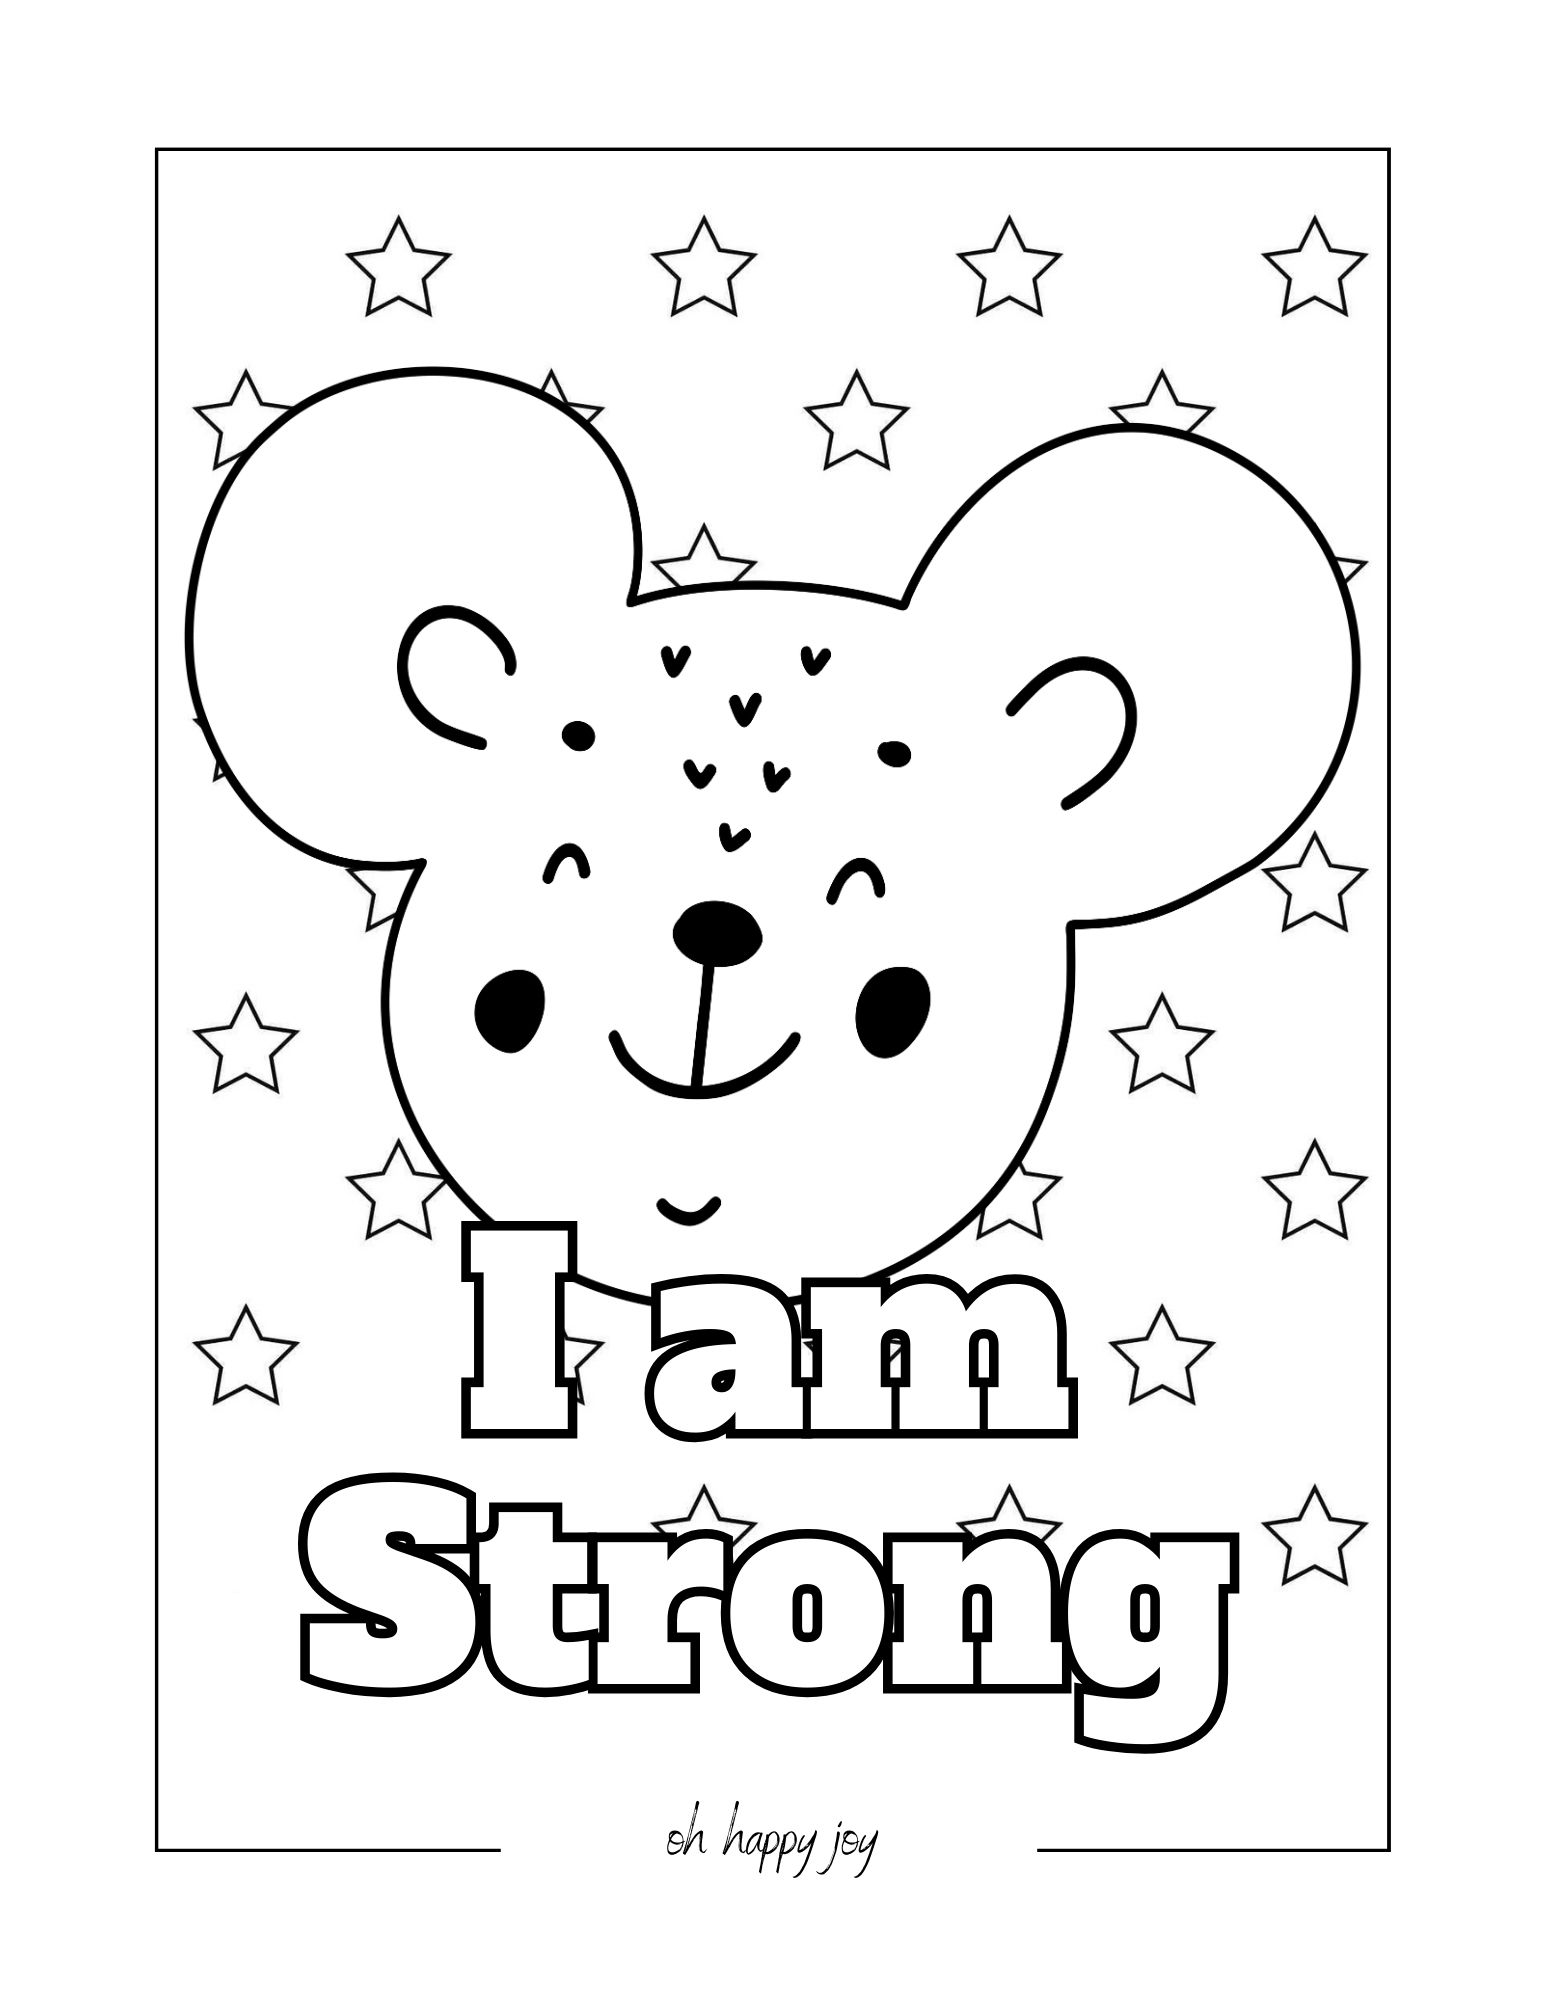 I am strong affirmation coloring page